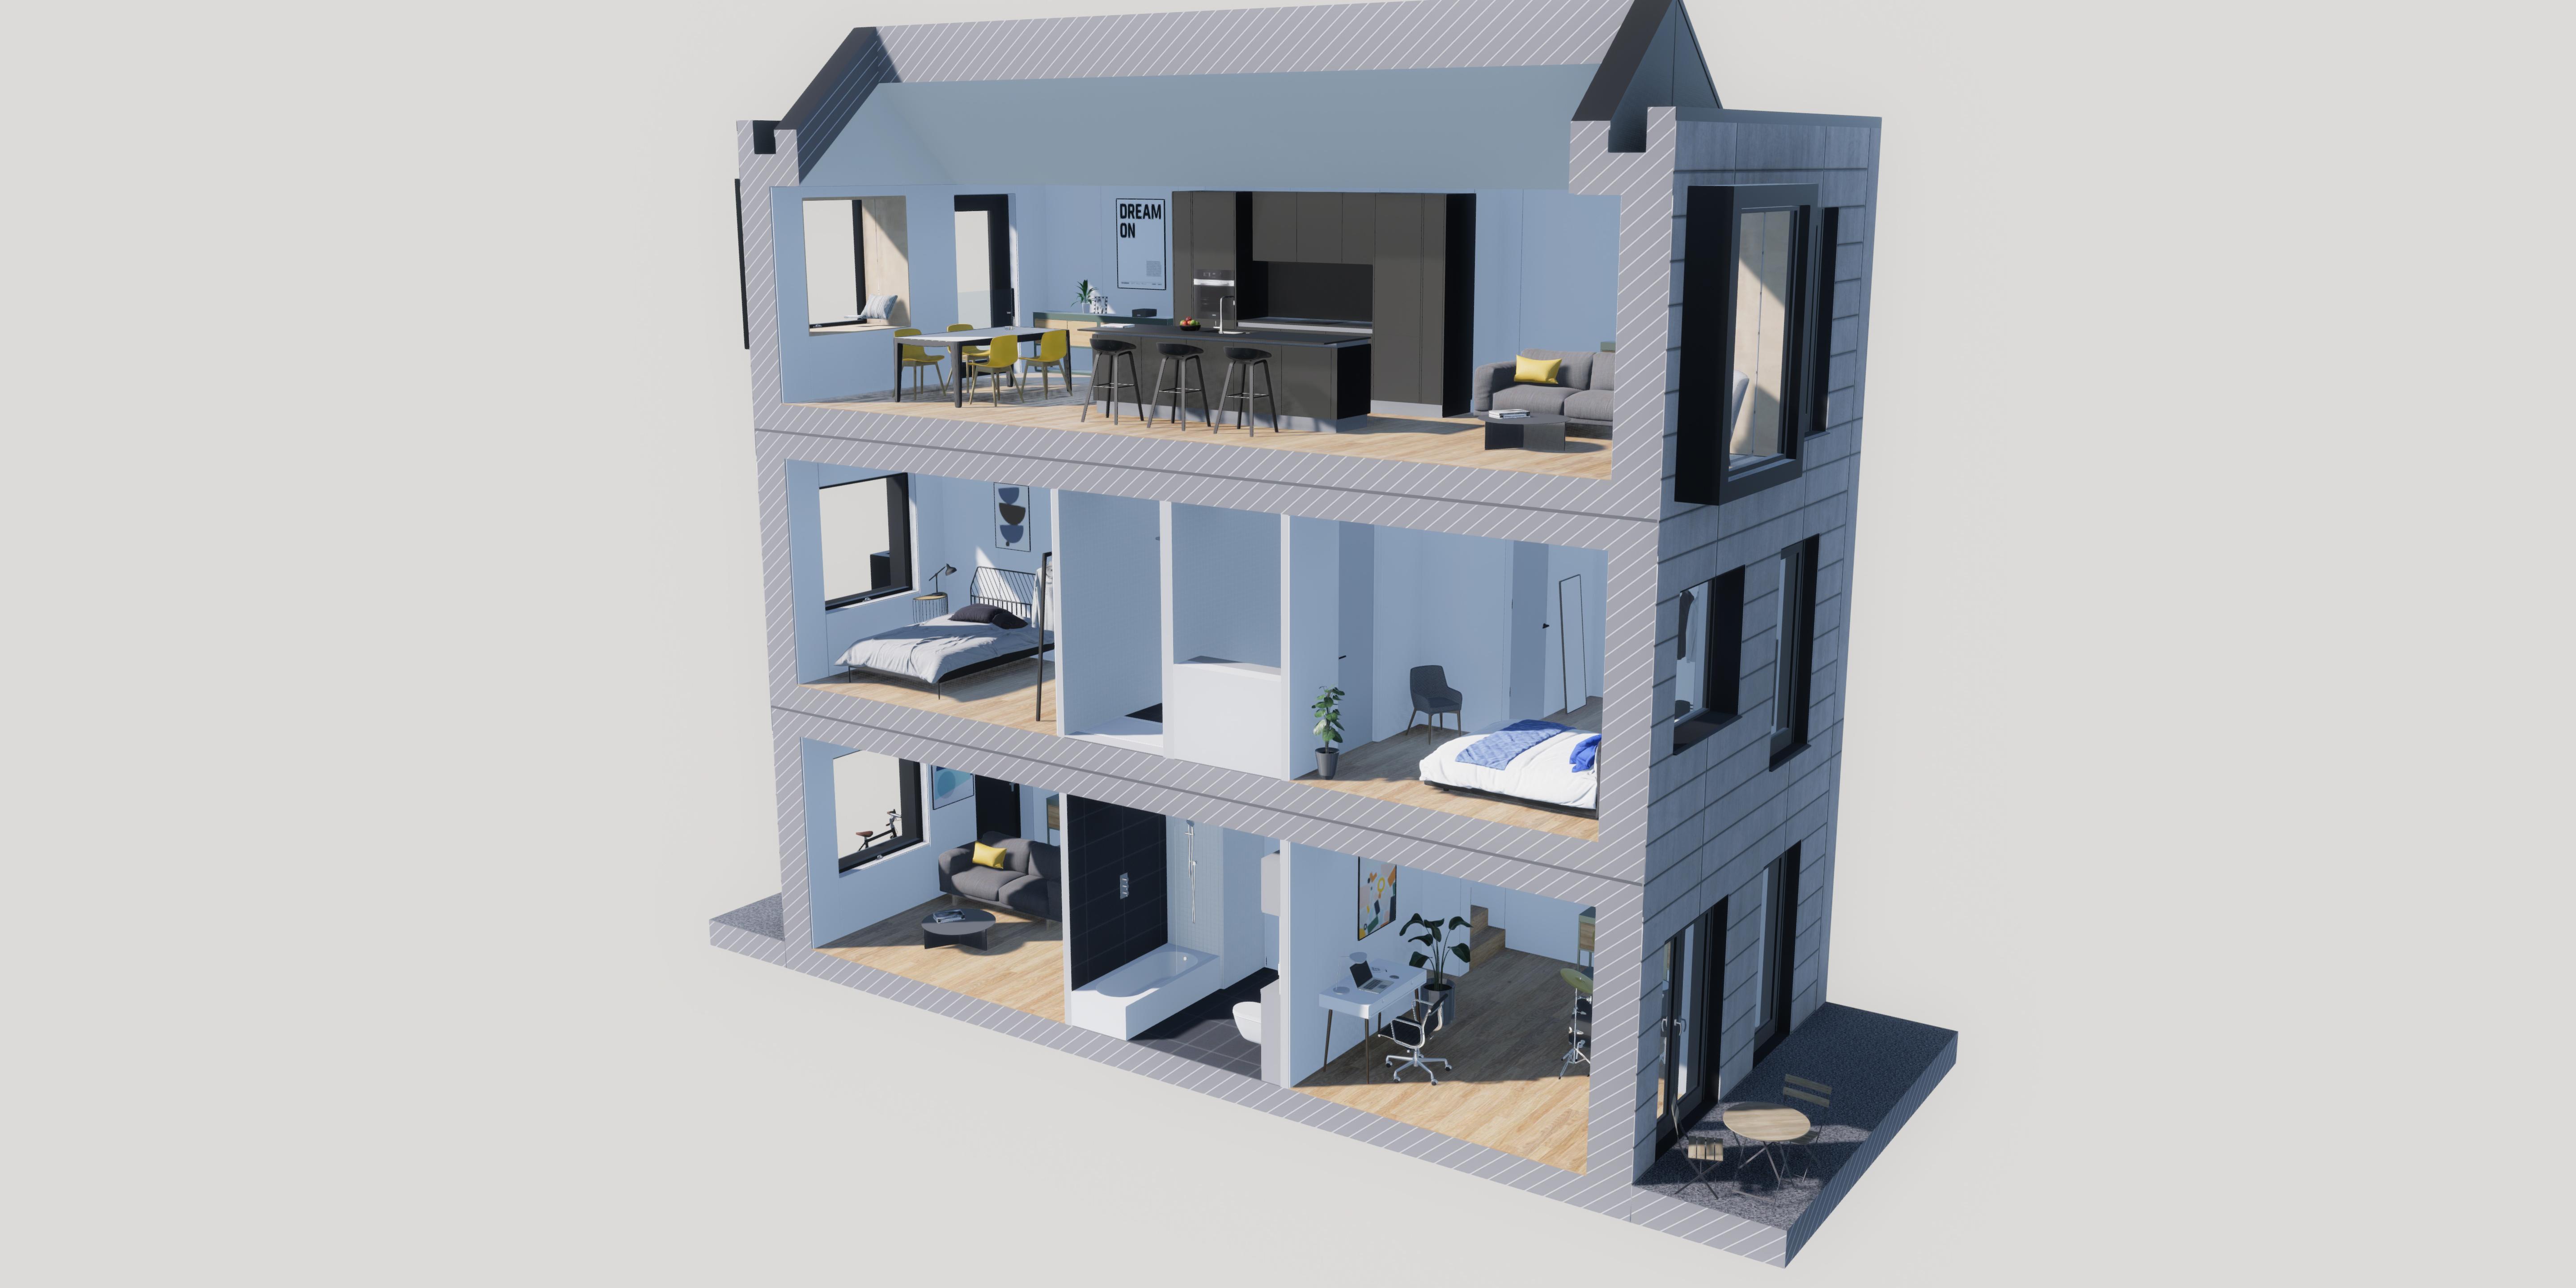 3D blueprint of a house that allows you to see inside almost like a dollhouse.